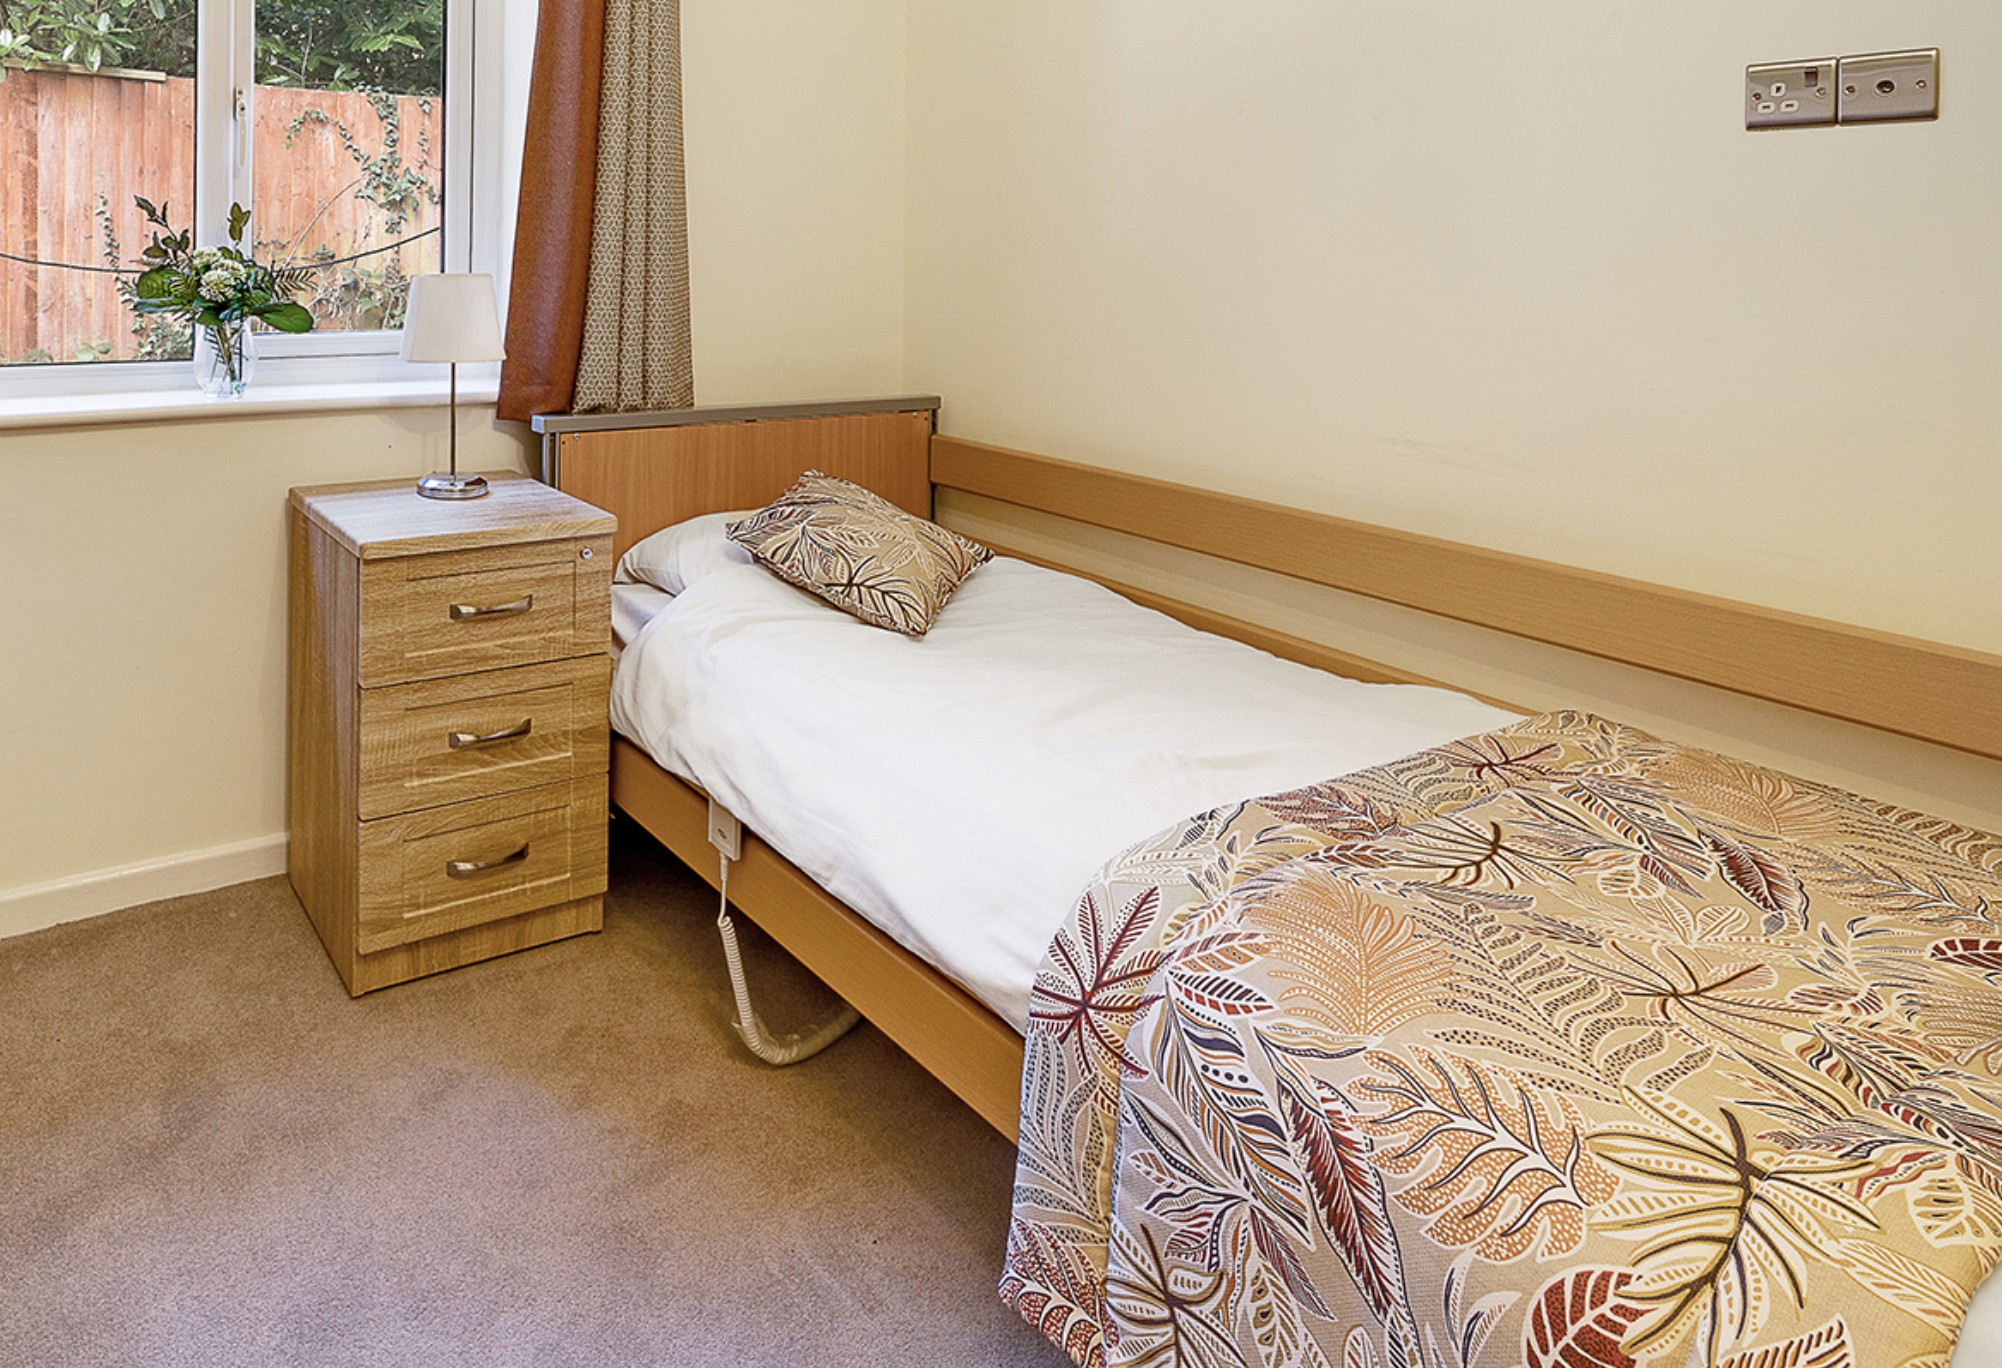 Bedroom of The Laurels and Pine Lodge Care Home in Poole, Dorset